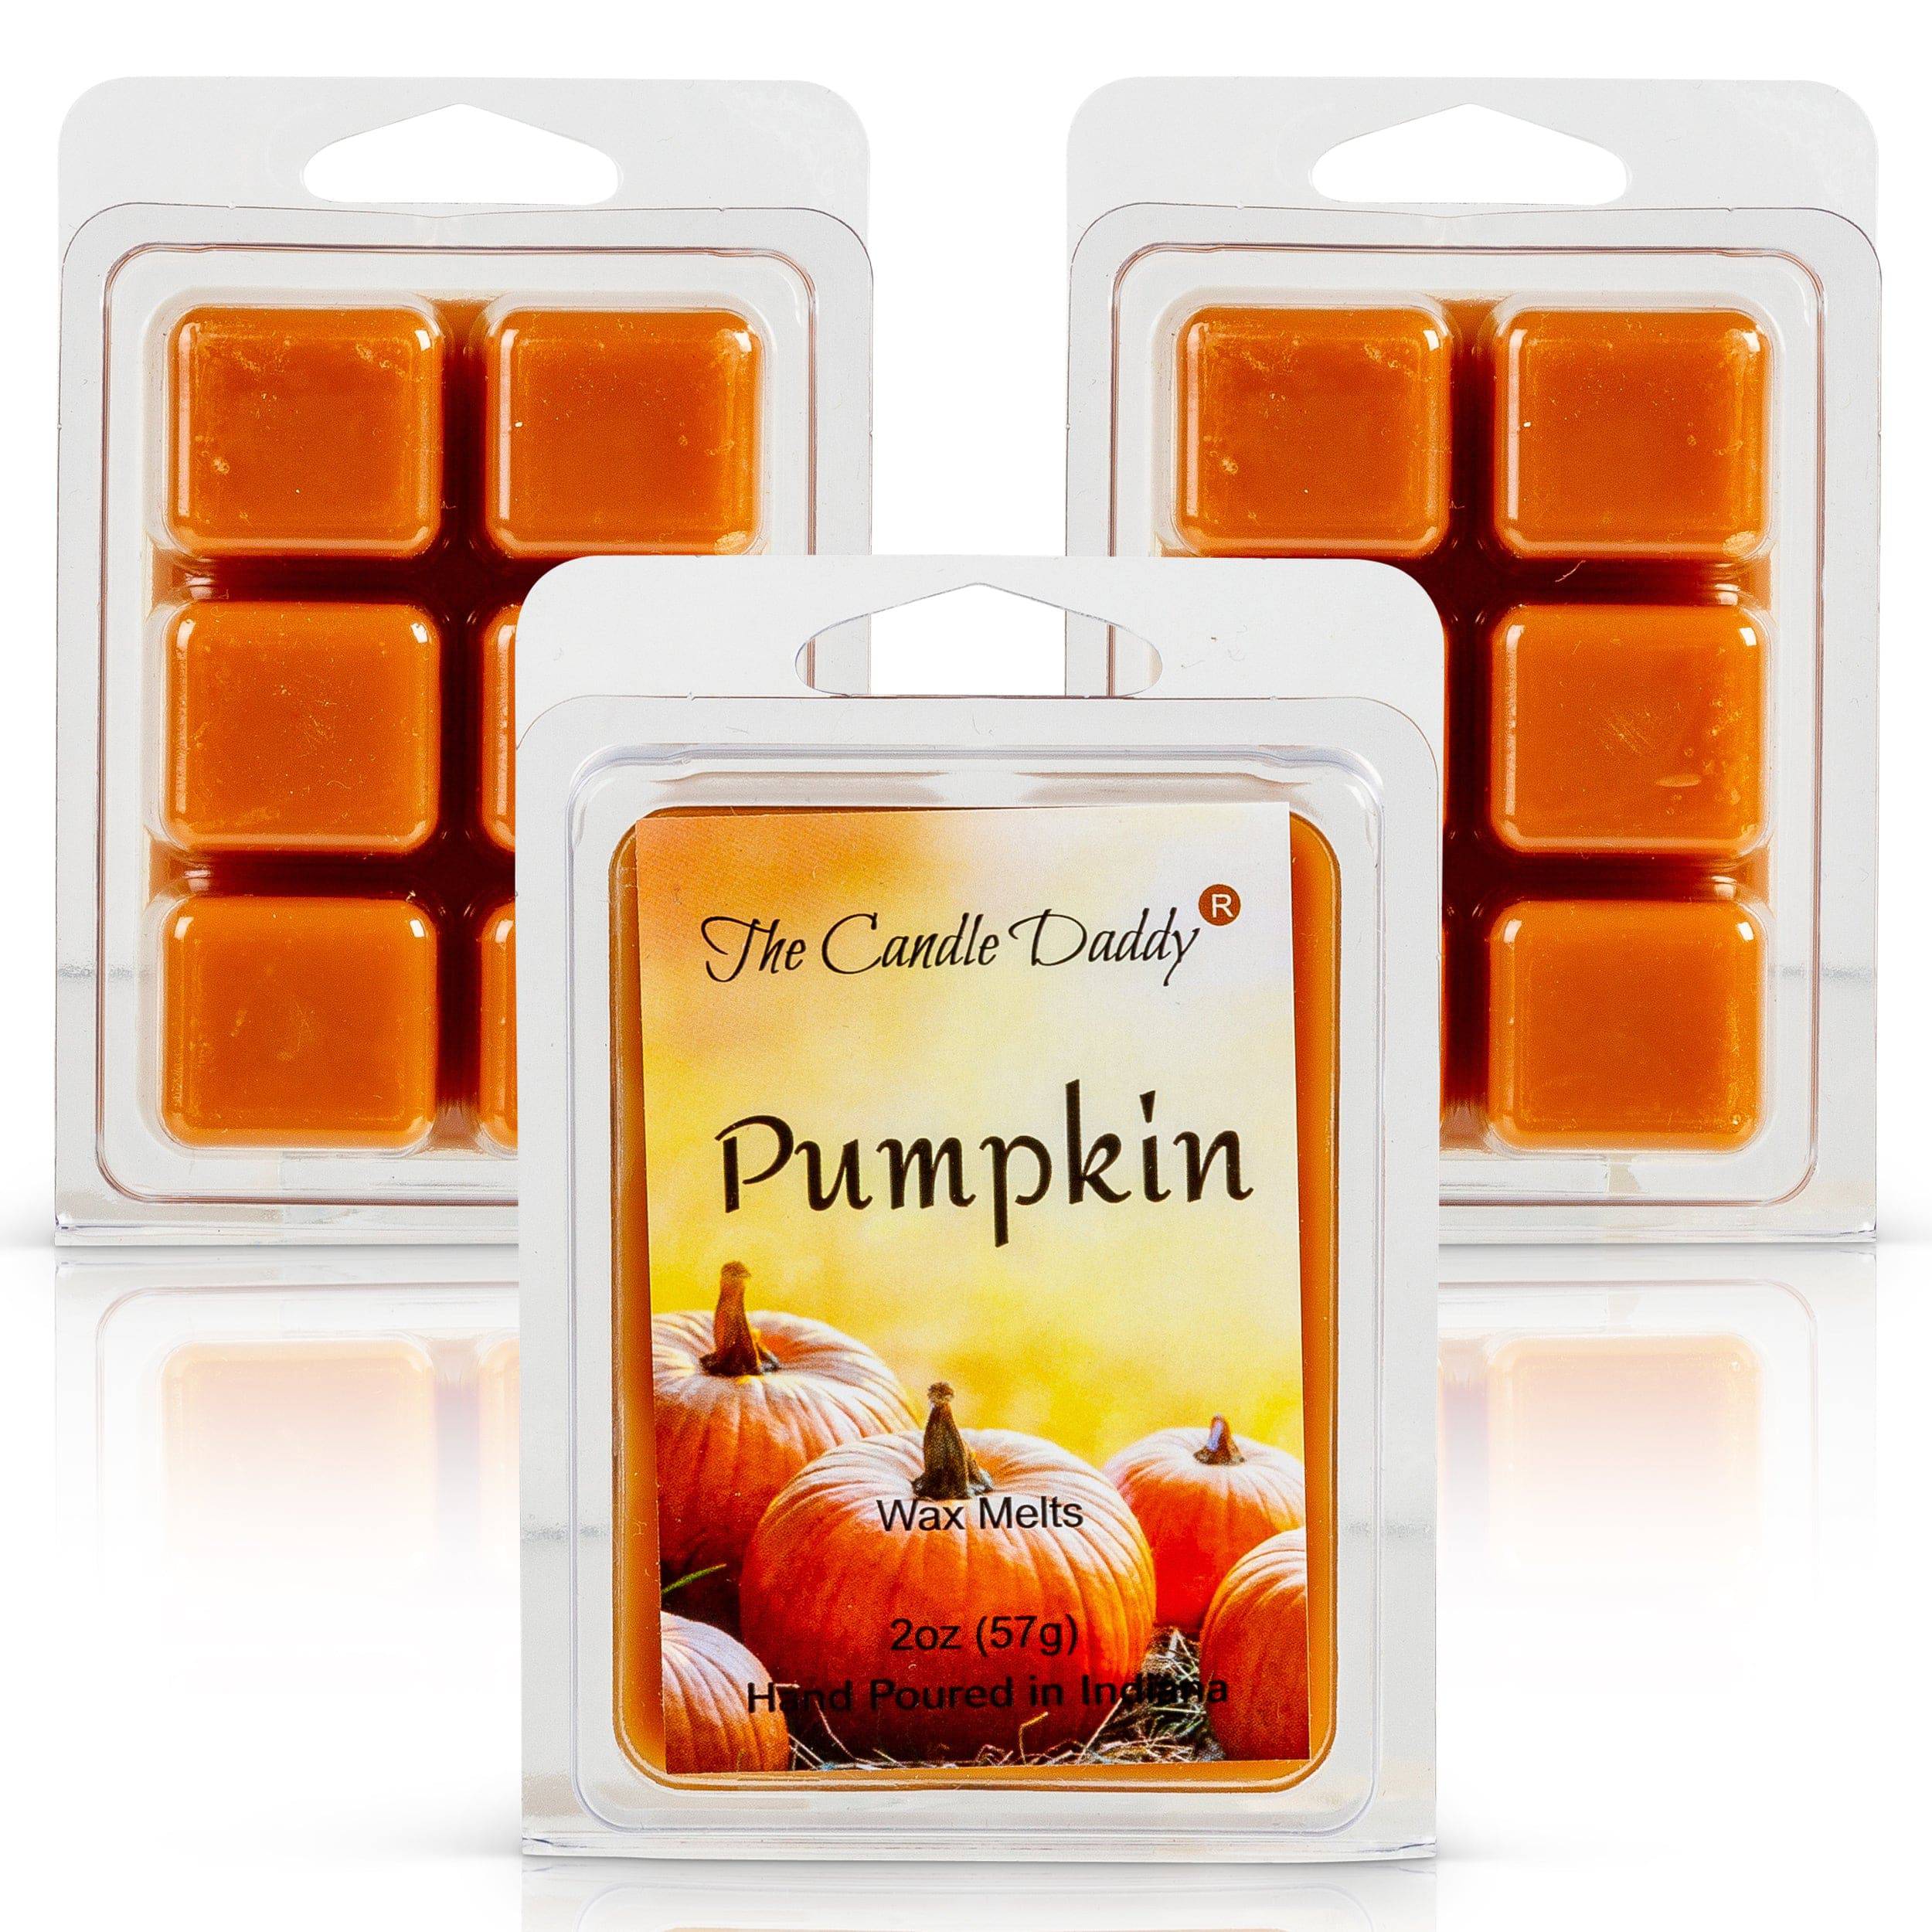 packet of wax melts - Can to Candle